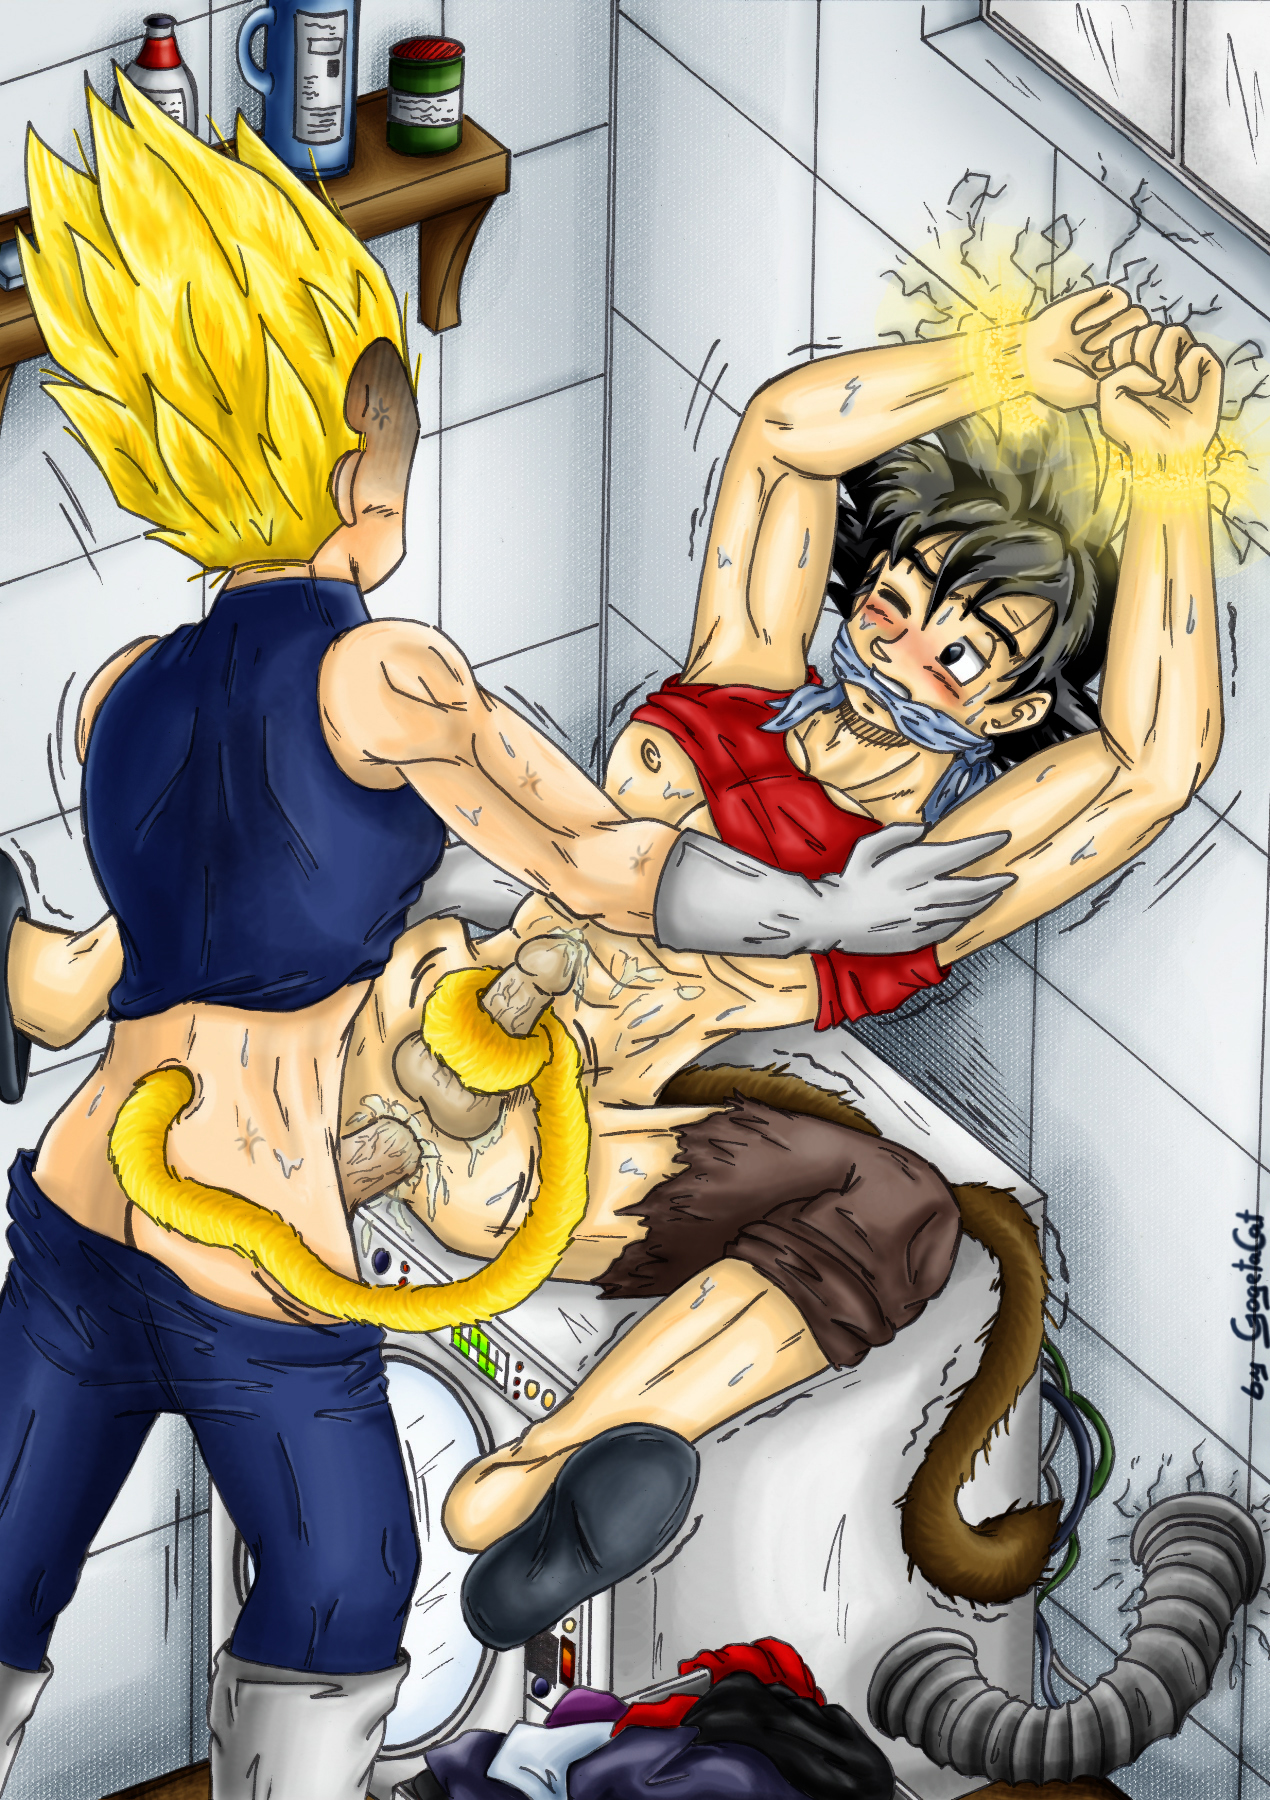 Dragon Ball Sex Hard Cartoon Charcters - Dbz sex pic. DragonBall Hentai Pictures. 2019-06-20